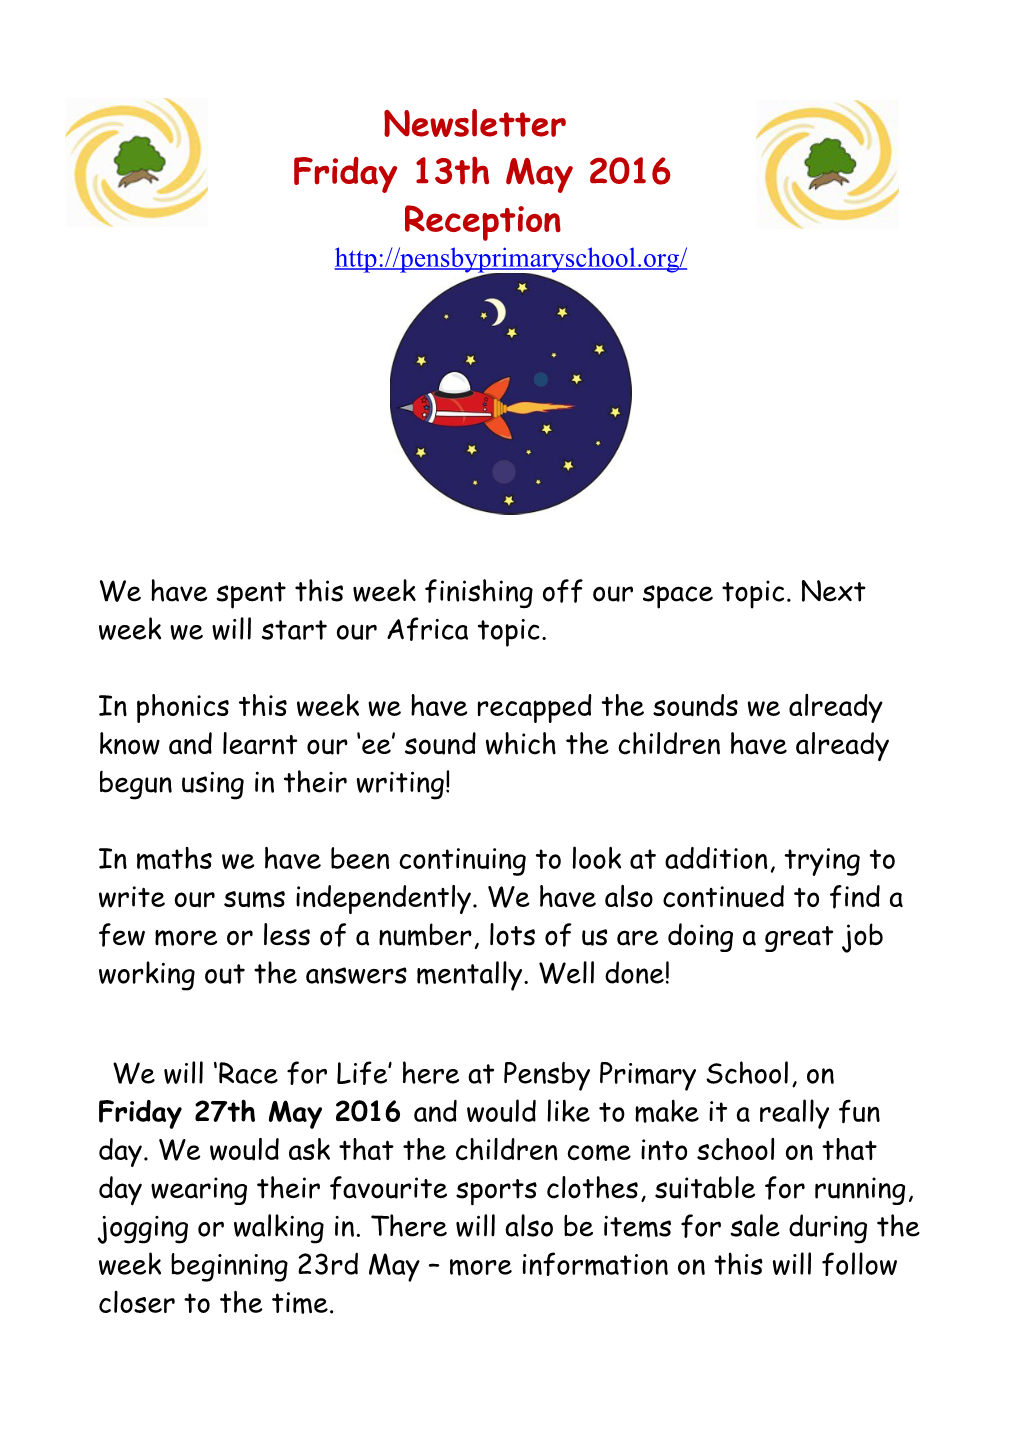 We Have Spent This Week Finishing Off Our Space Topic. Next Week We Will Start Our Africa